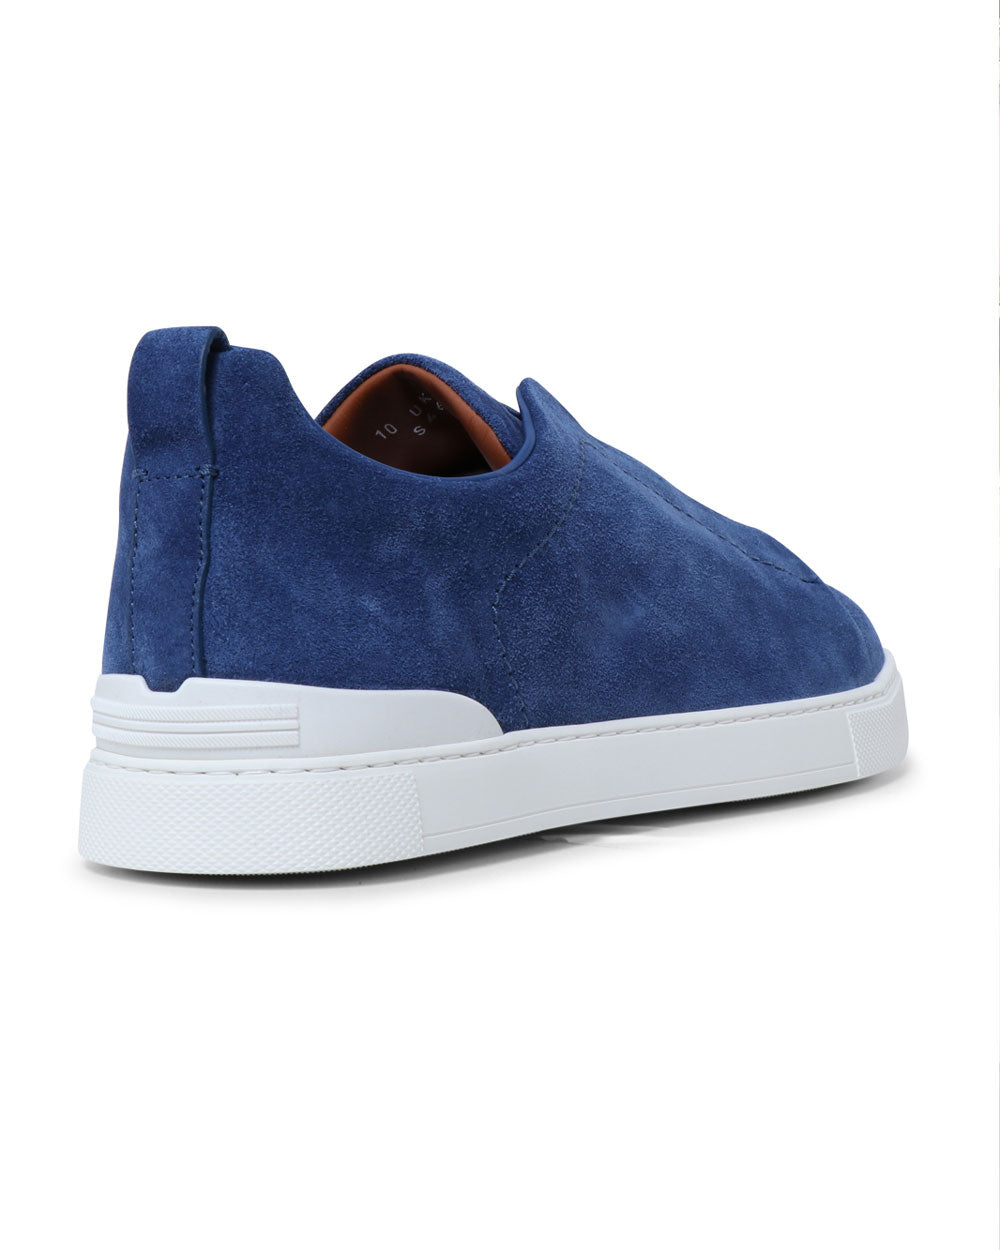 Utility Suede Triple Stitch Sneakers in Light Blue